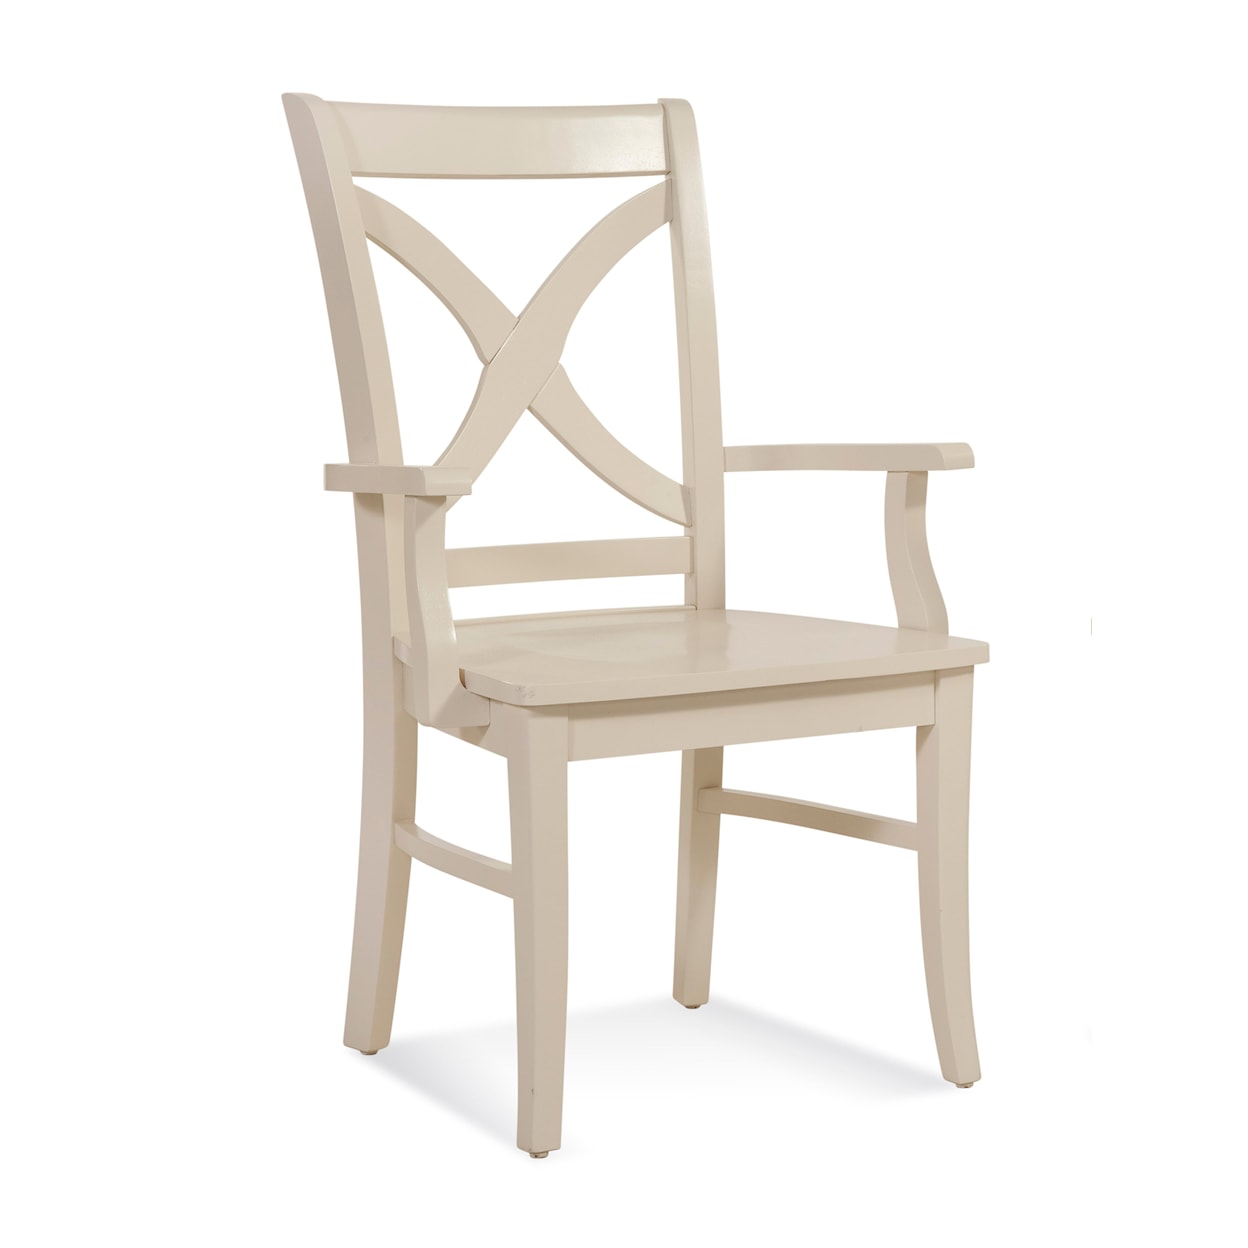 Braxton Culler Hues Hues Dining Arm Chair with Wood Seat